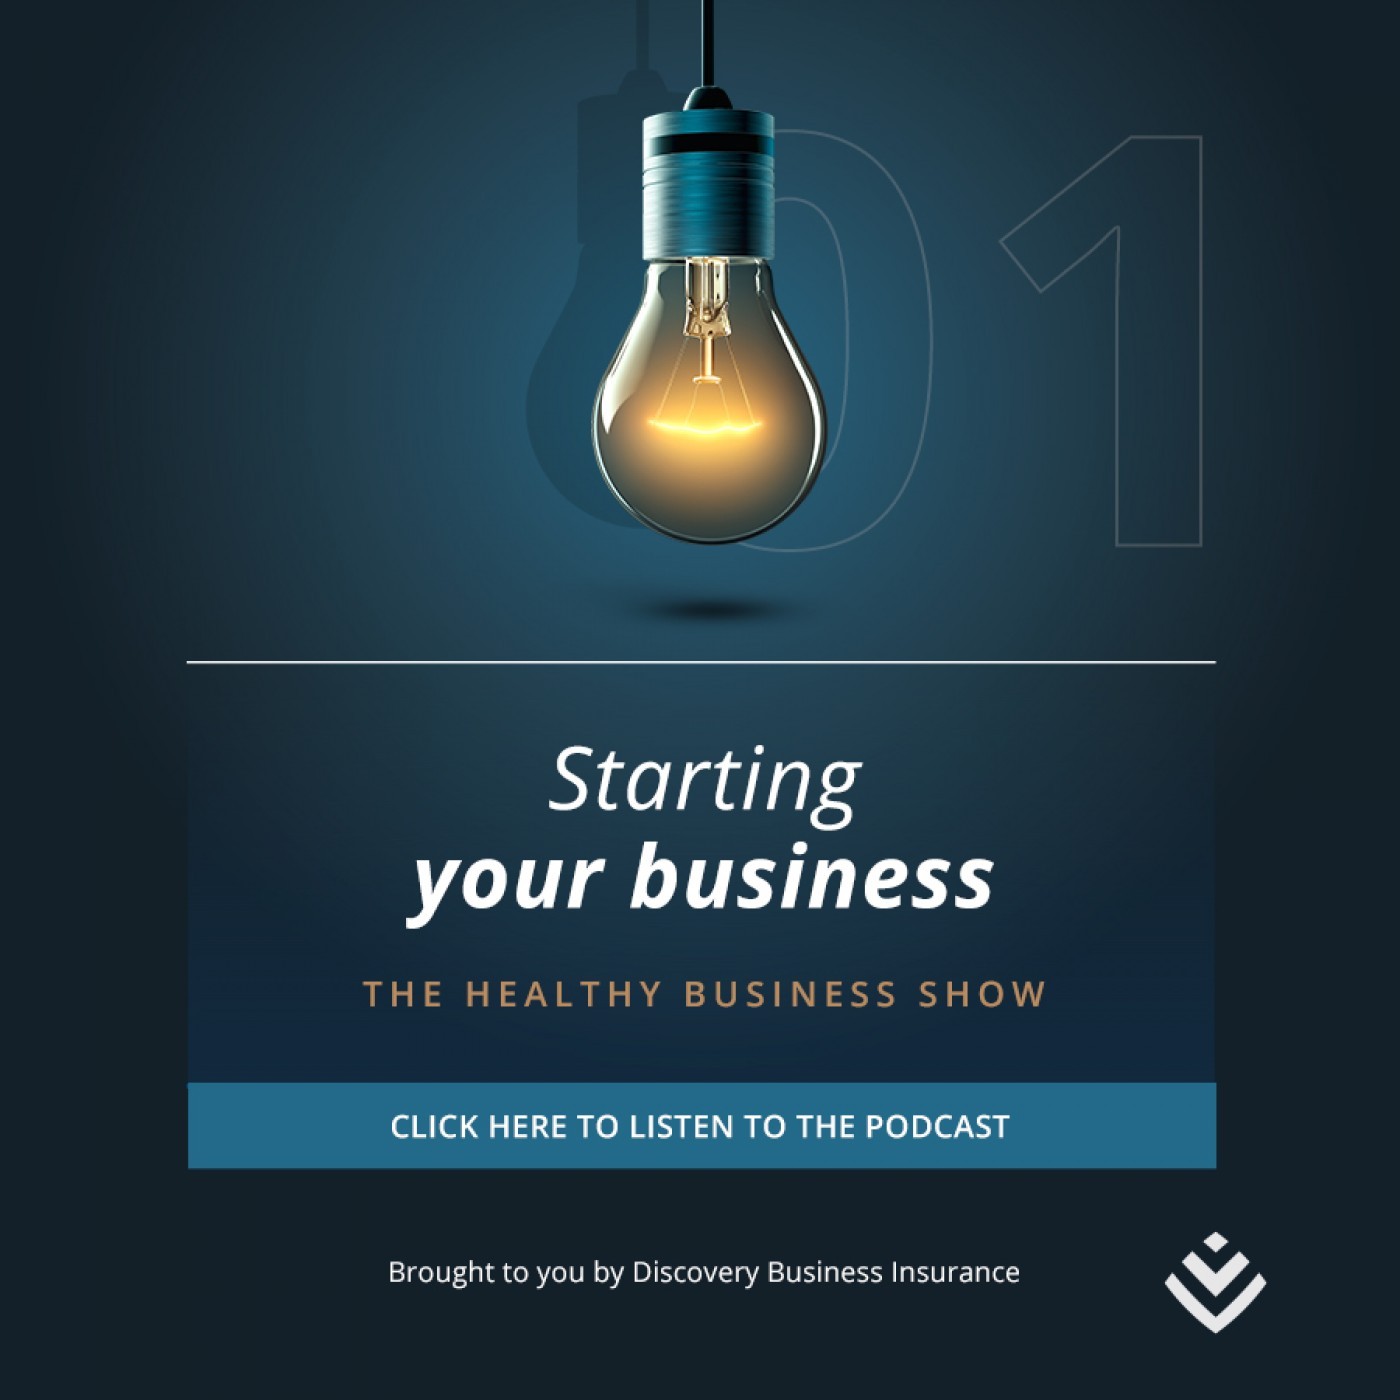 The Healthy Business Show: Starting your business